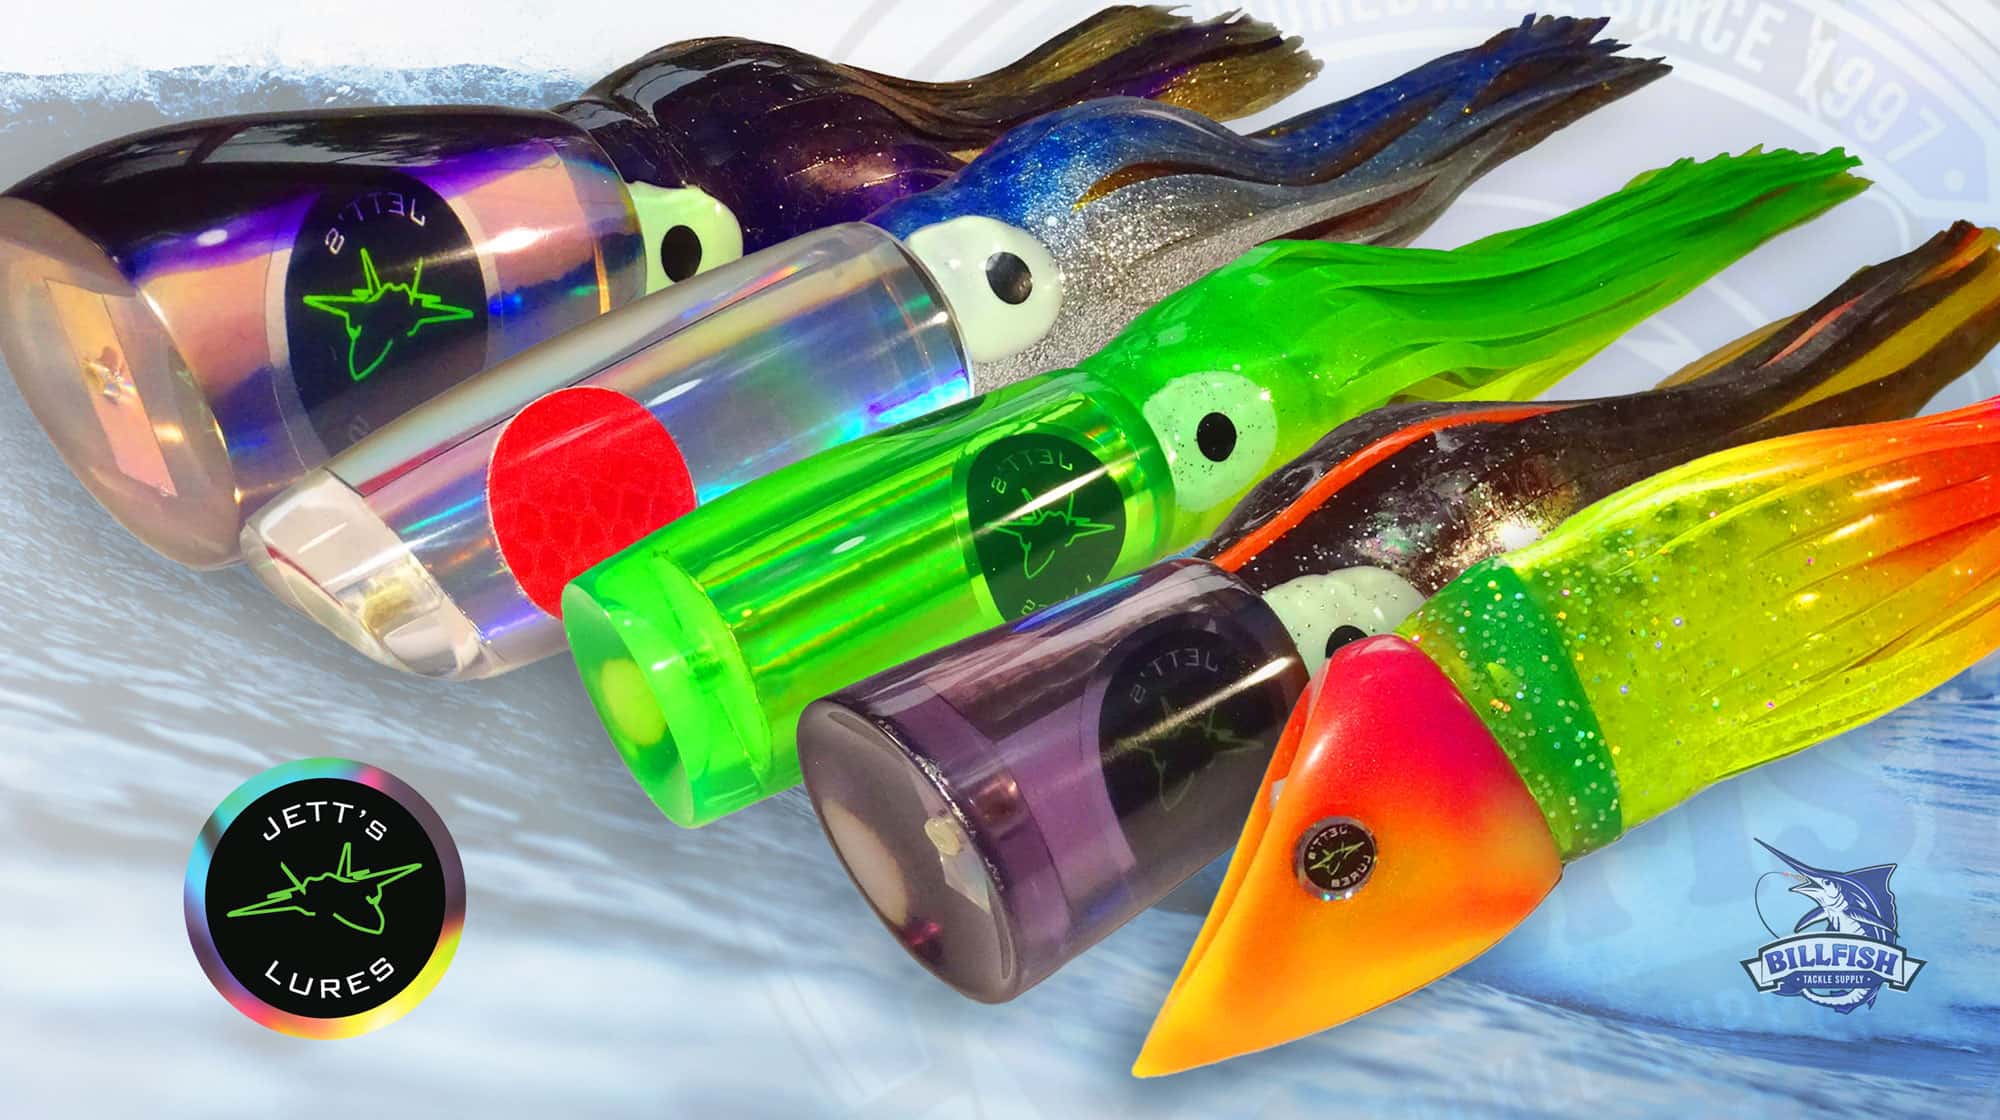 Best trolling lures for marlin - Jetts Lures